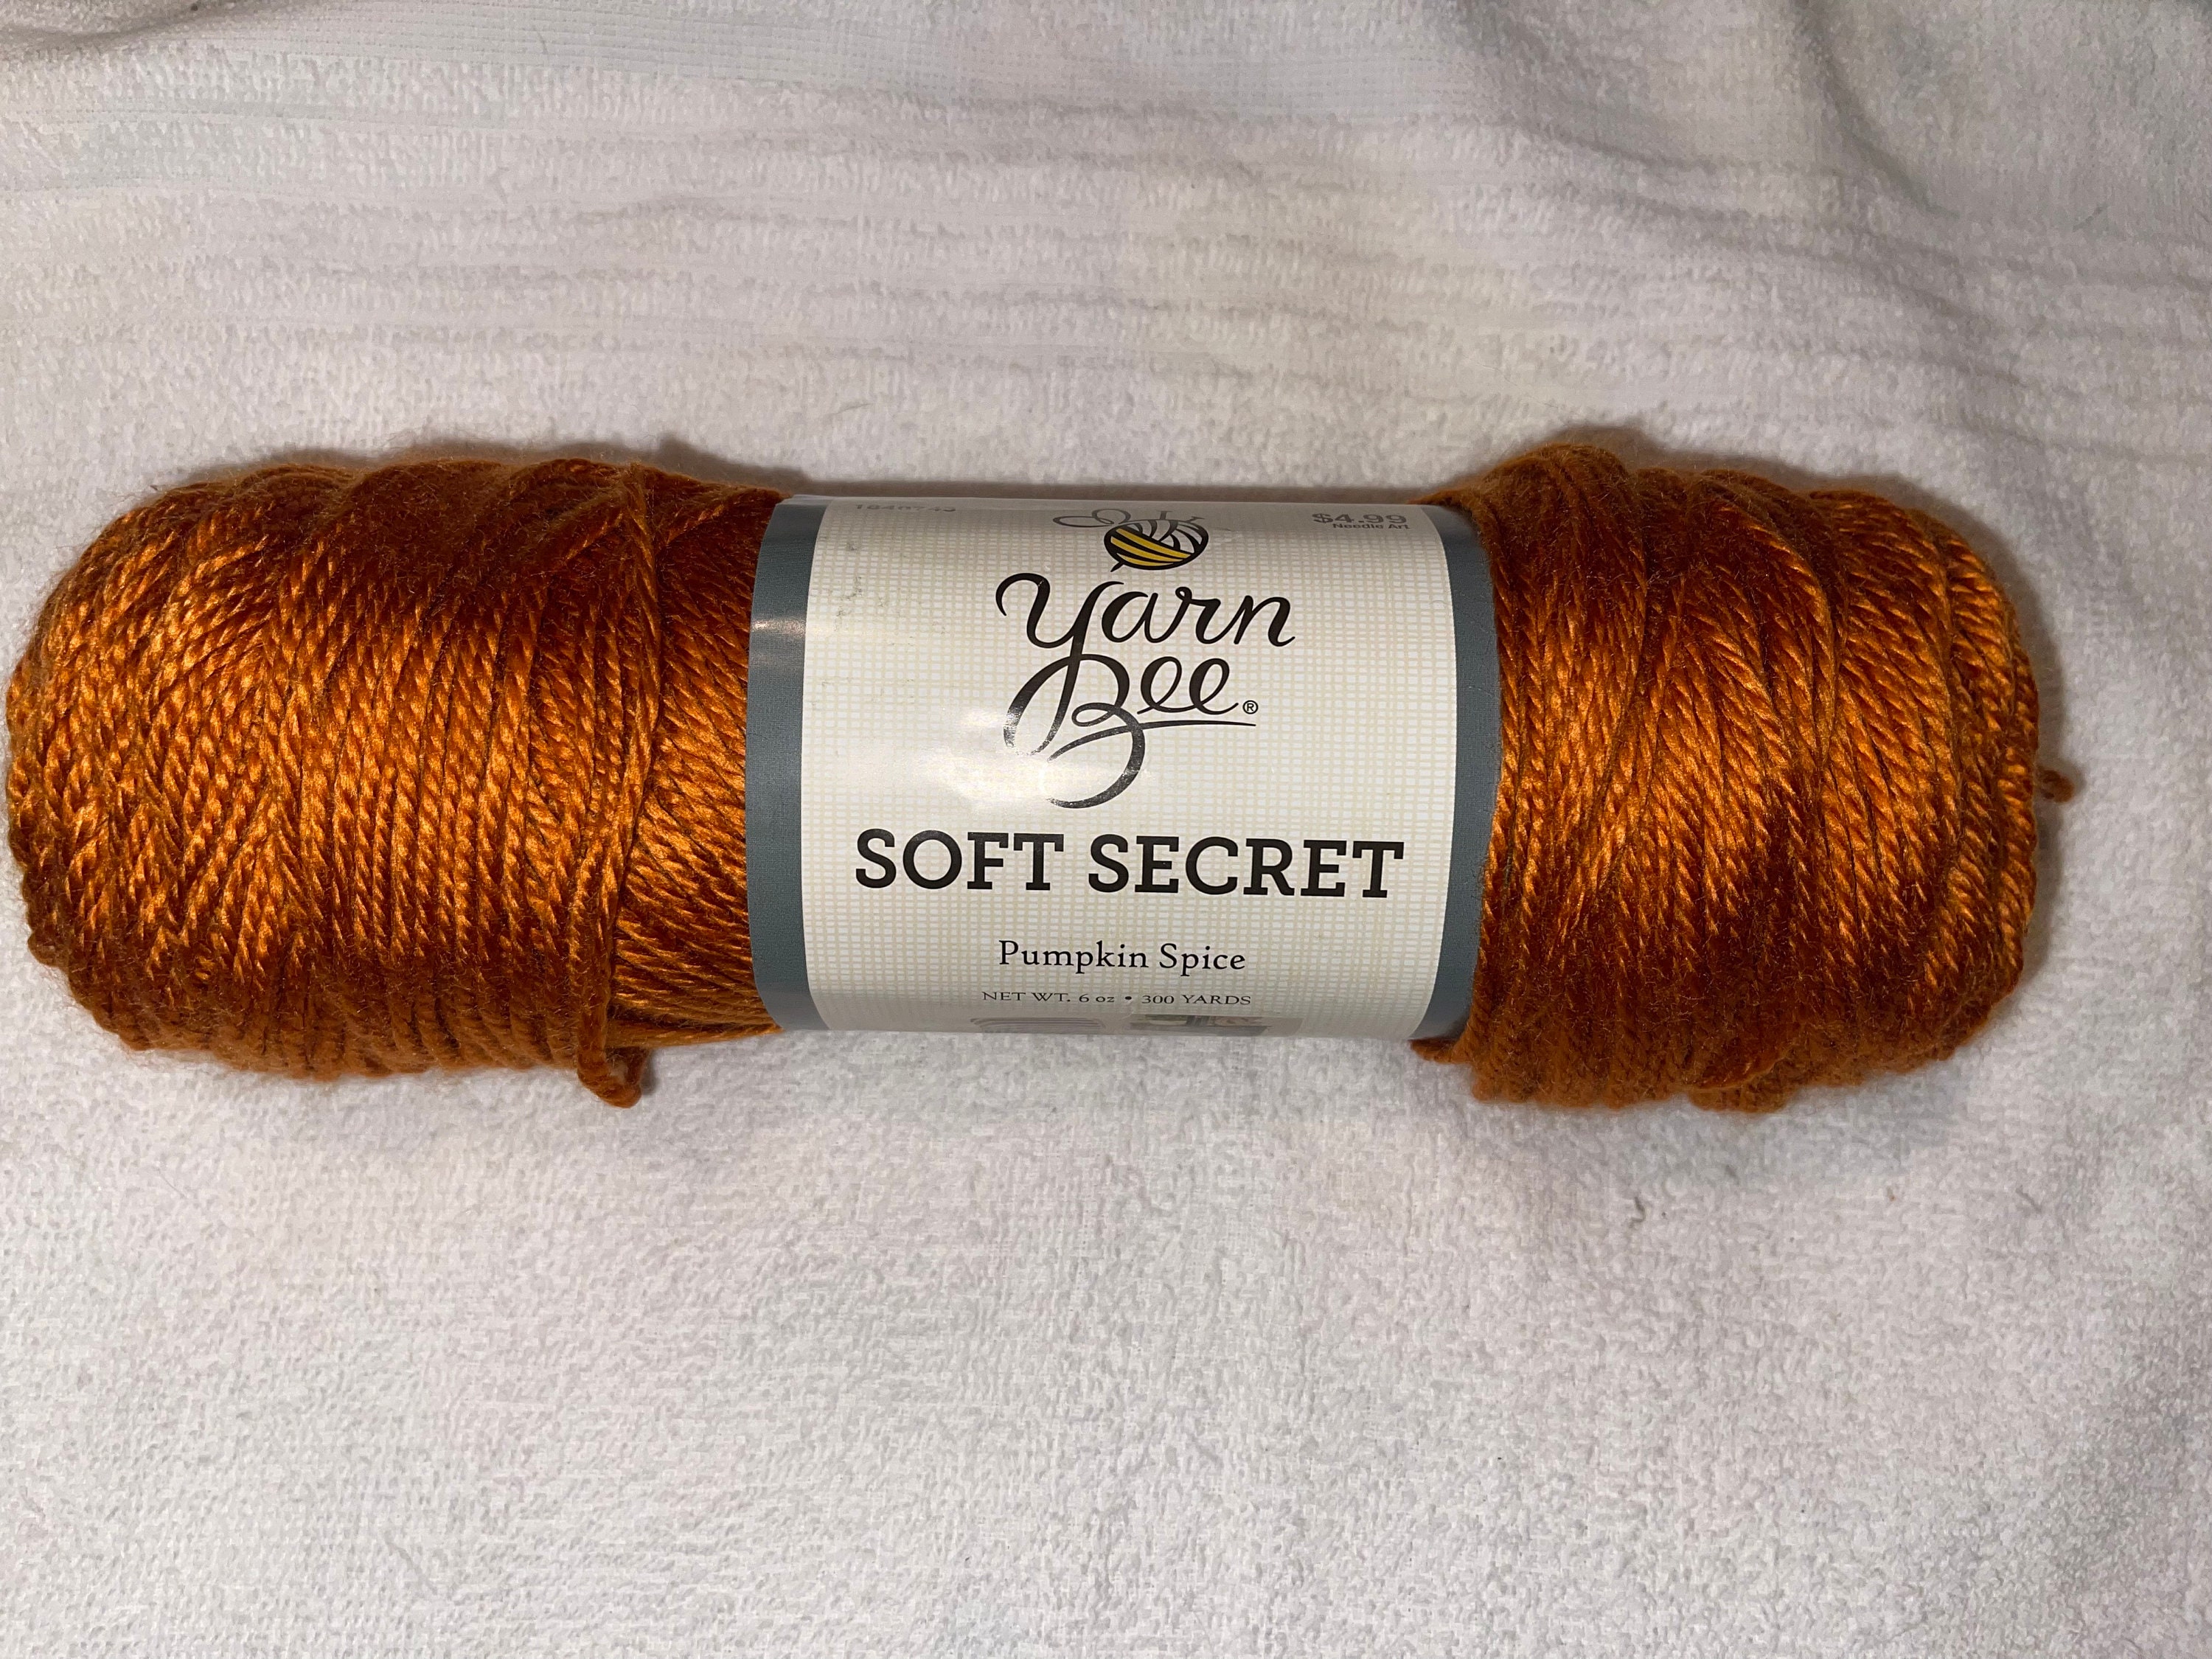 Yarn Bee Soft and Sleek, lot of 2, color is Spice 620